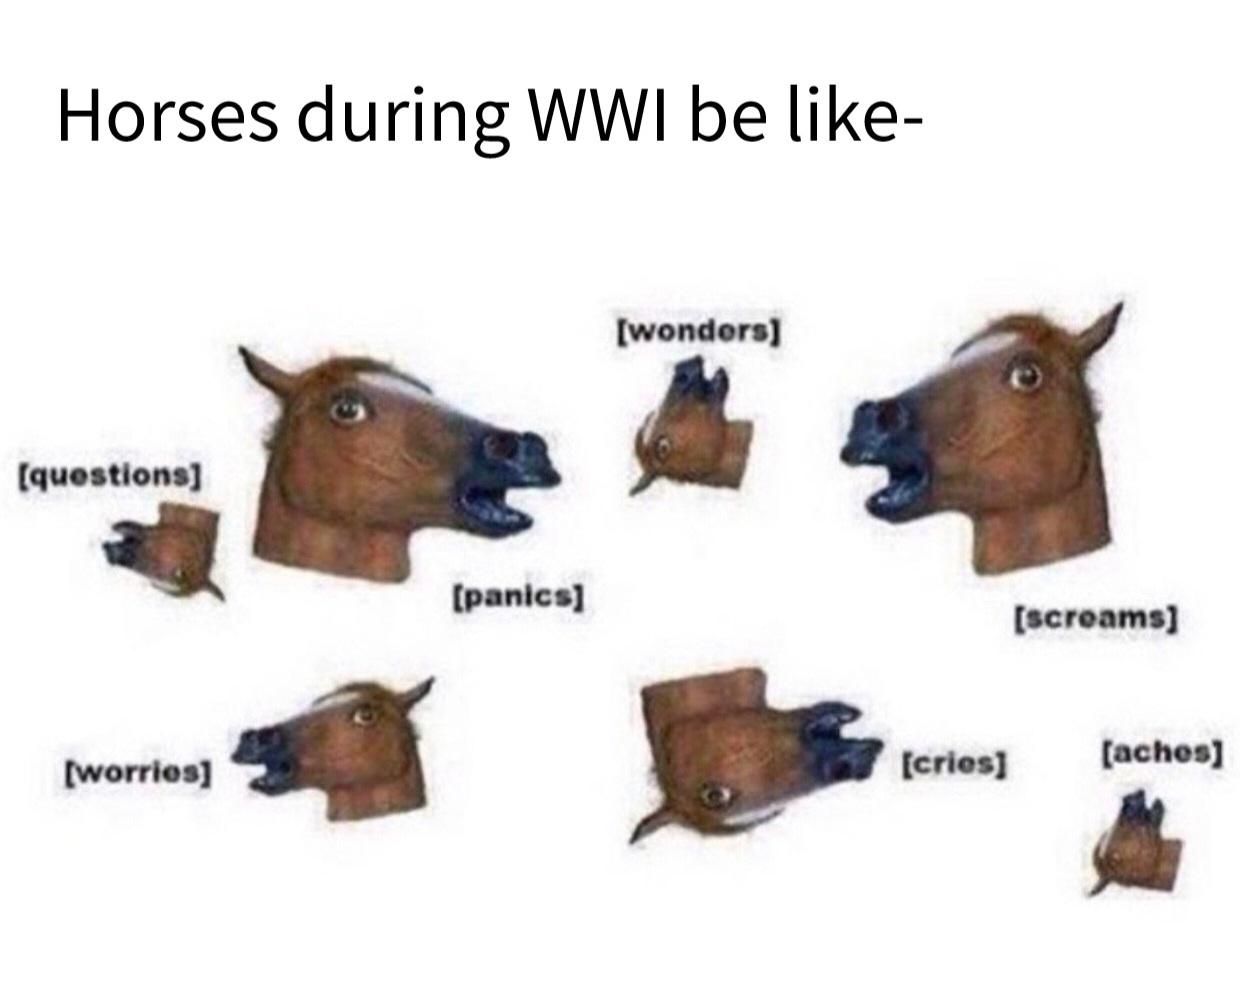 In total, over 8 million horses perished during the war.